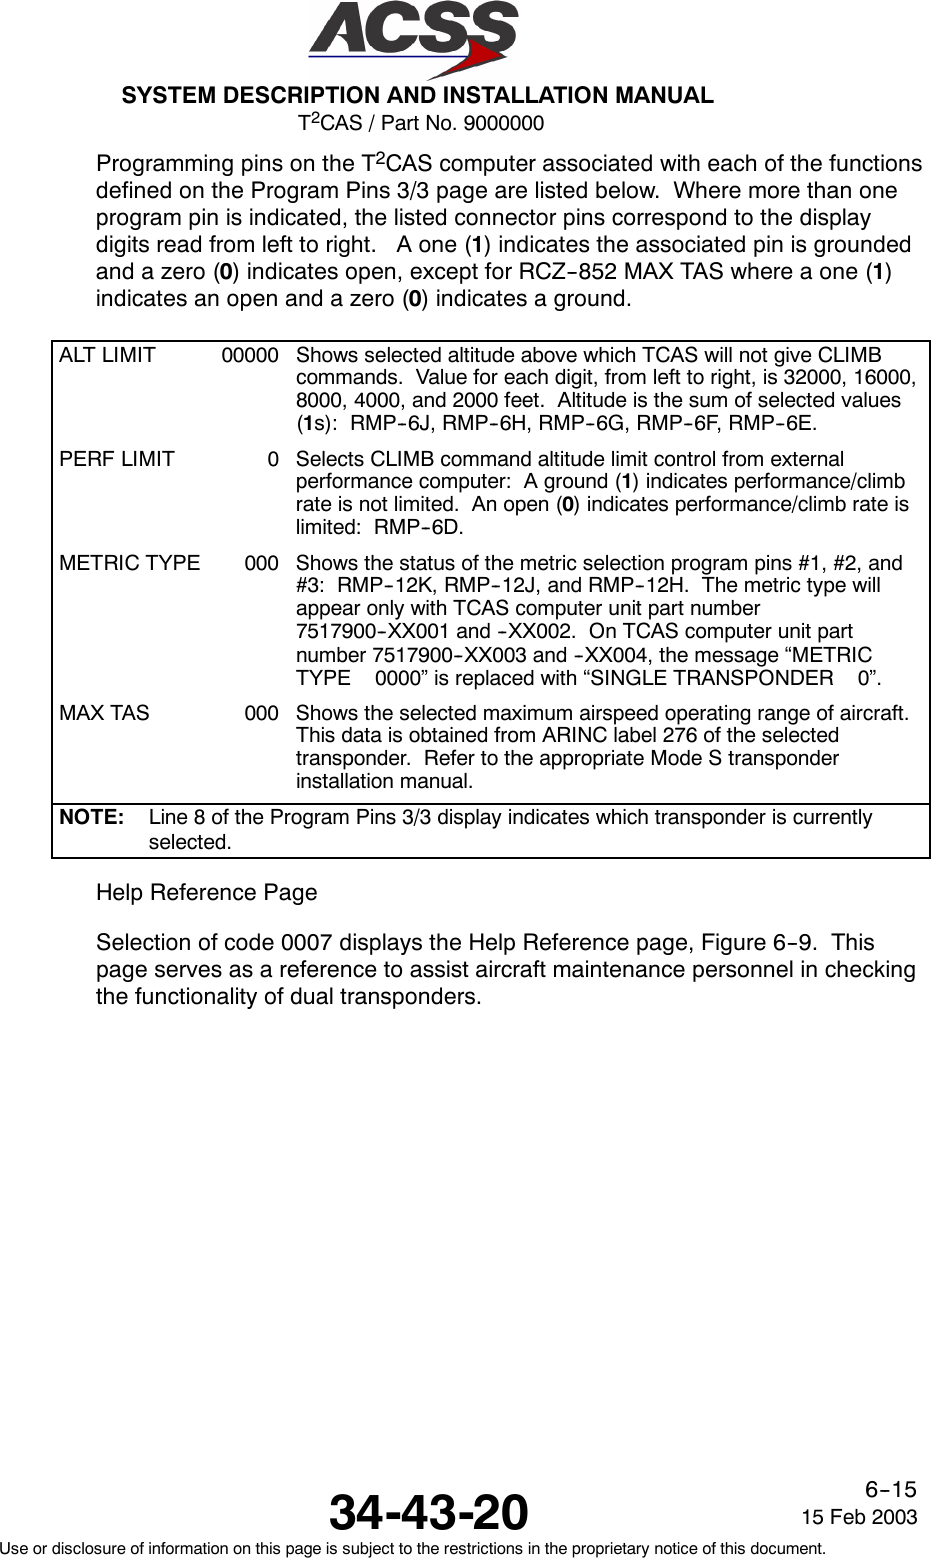 T2CAS / Part No. 9000000SYSTEM DESCRIPTION AND INSTALLATION MANUAL34-43-20 15 Feb 2003Use or disclosure of information on this page is subject to the restrictions in the proprietary notice of this document.6--15Programming pins on the T2CAS computer associated with each of the functionsdefined on the Program Pins 3/3 page are listed below. Where more than oneprogram pin is indicated, the listed connector pins correspond to the displaydigits read from left to right. A one (1) indicates the associated pin is groundedandazero(0) indicates open, except for RCZ--852 MAX TAS where a one (1)indicates an open and a zero (0) indicates a ground.ALT LIMIT 00000 Shows selected altitude above which TCAS will not give CLIMBcommands. Value for each digit, from left to right, is 32000, 16000,8000, 4000, and 2000 feet. Altitude is the sum of selected values(1s): RMP--6J, RMP--6H, RMP--6G, RMP--6F, RMP--6E.PERF LIMIT 0 Selects CLIMB command altitude limit control from externalperformance computer: A ground (1) indicates performance/climbrate is not limited. An open (0) indicates performance/climb rate islimited: RMP--6D.METRIC TYPE 000 Shows the status of the metric selection program pins #1, #2, and#3: RMP--12K, RMP--12J, and RMP--12H. The metric type willappear only with TCAS computer unit part number7517900--XX001 and --XX002. On TCAS computer unit partnumber 7517900--XX003 and --XX004, the message “METRICTYPE 0000” is replaced with “SINGLE TRANSPONDER 0”.MAX TAS 000 Shows the selected maximum airspeed operating range of aircraft.This data is obtained from ARINC label 276 of the selectedtransponder. Refer to the appropriate Mode S transponderinstallation manual.NOTE: Line 8 of the Program Pins 3/3 display indicates which transponder is currentlyselected.Help Reference PageSelection of code 0007 displays the Help Reference page, Figure 6--9. Thispage serves as a reference to assist aircraft maintenance personnel in checkingthe functionality of dual transponders.